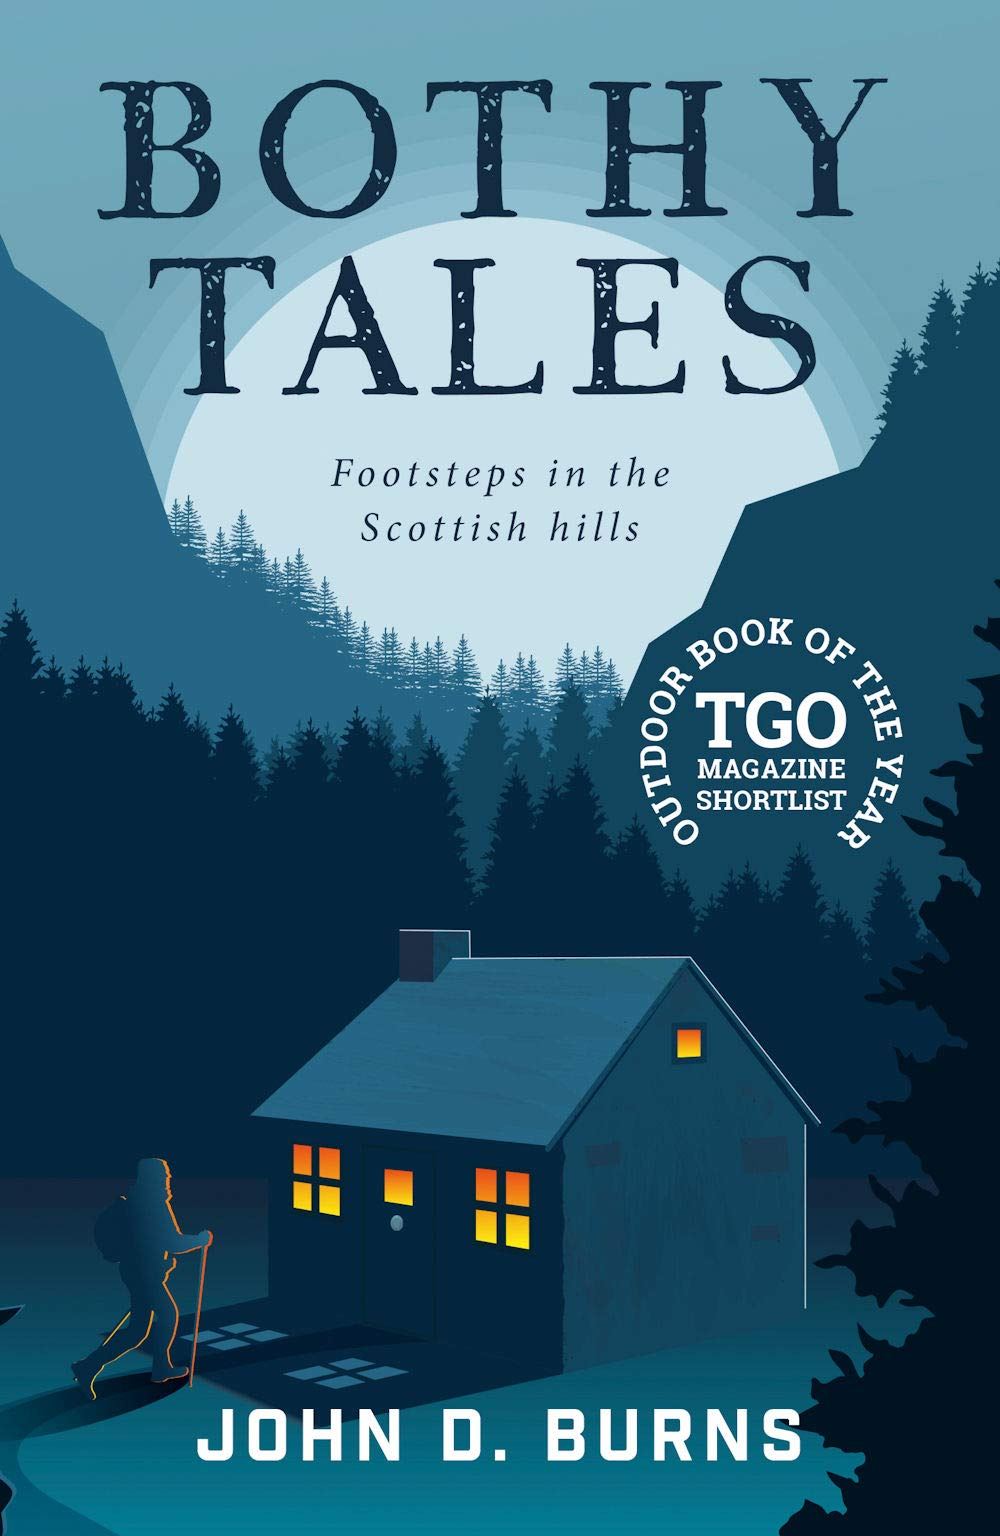 Bothy Tales - Footsteps in the Scottish hills